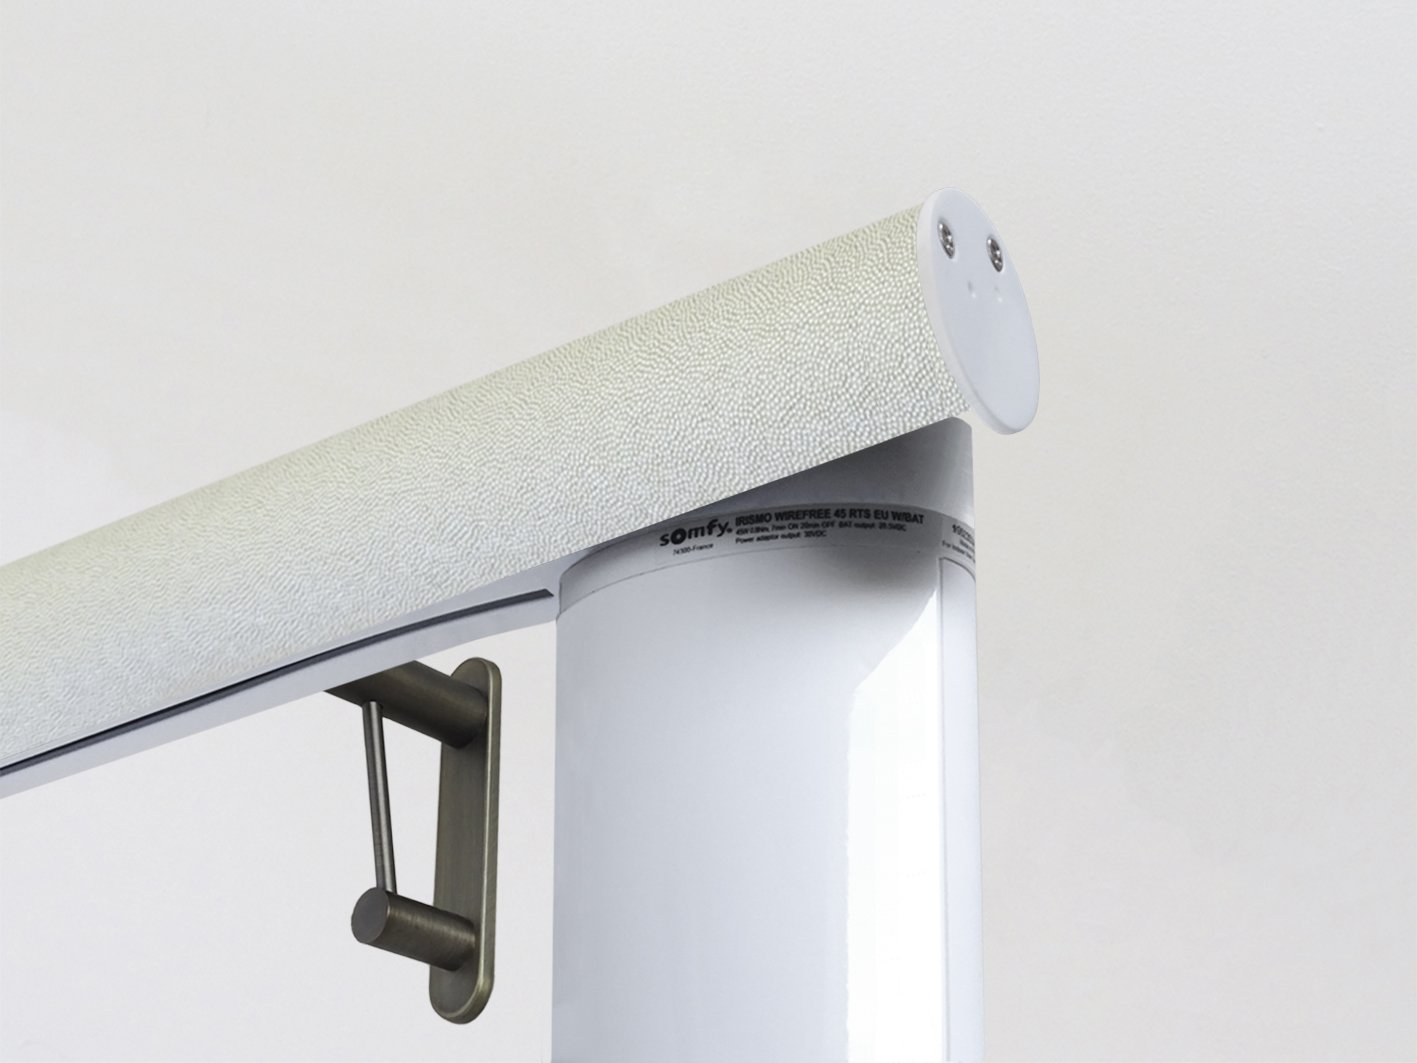 Motorised electric curtain pole in white pepper, wireless & battery powered using the Somfy Glydea track | Walcot House UK curtain pole specialists